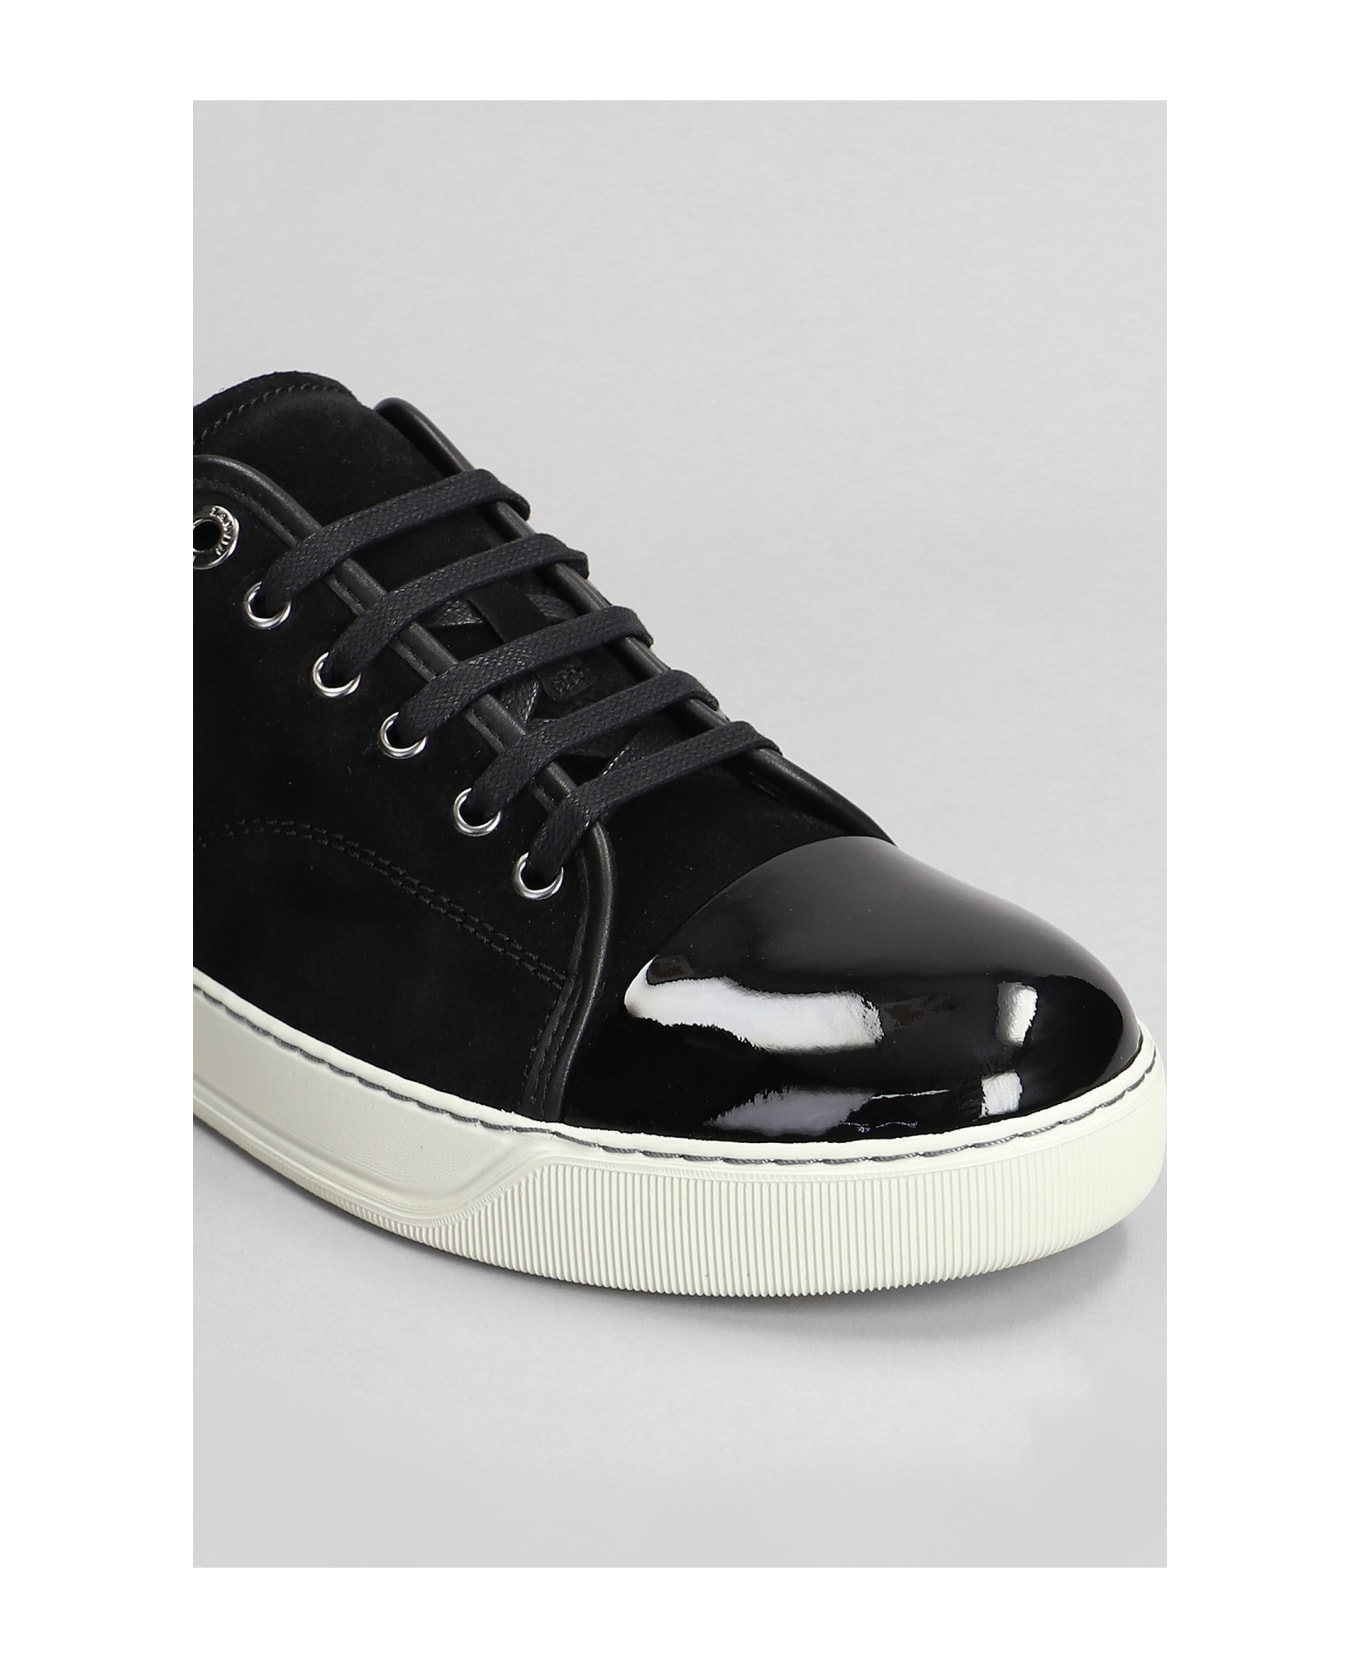 Lanvin Dbb1 Sneakers In Black Suede And Leather - black